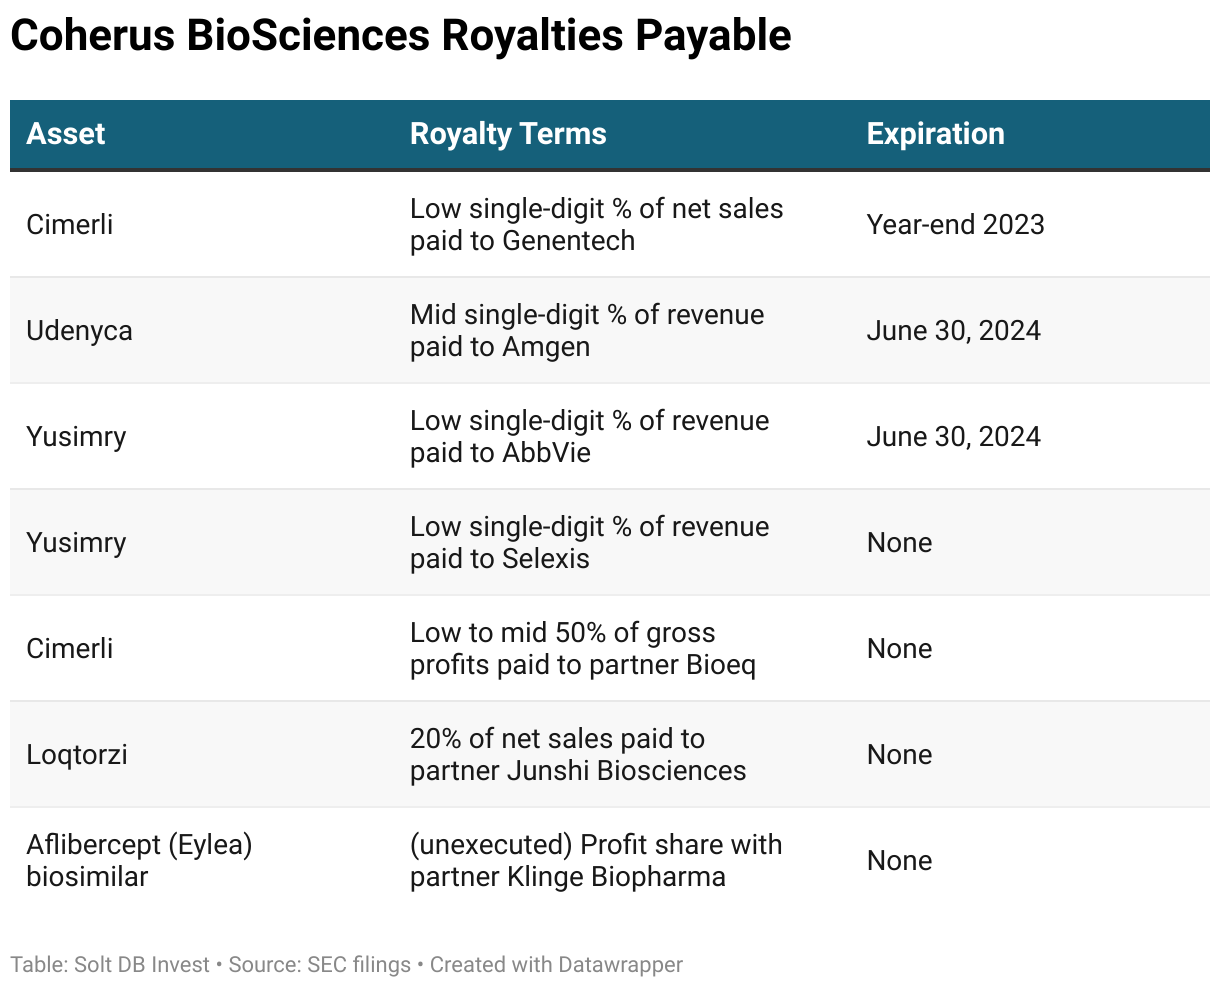 A table listing all royalty agreements in place for Coherus BioSciences' portfolio.